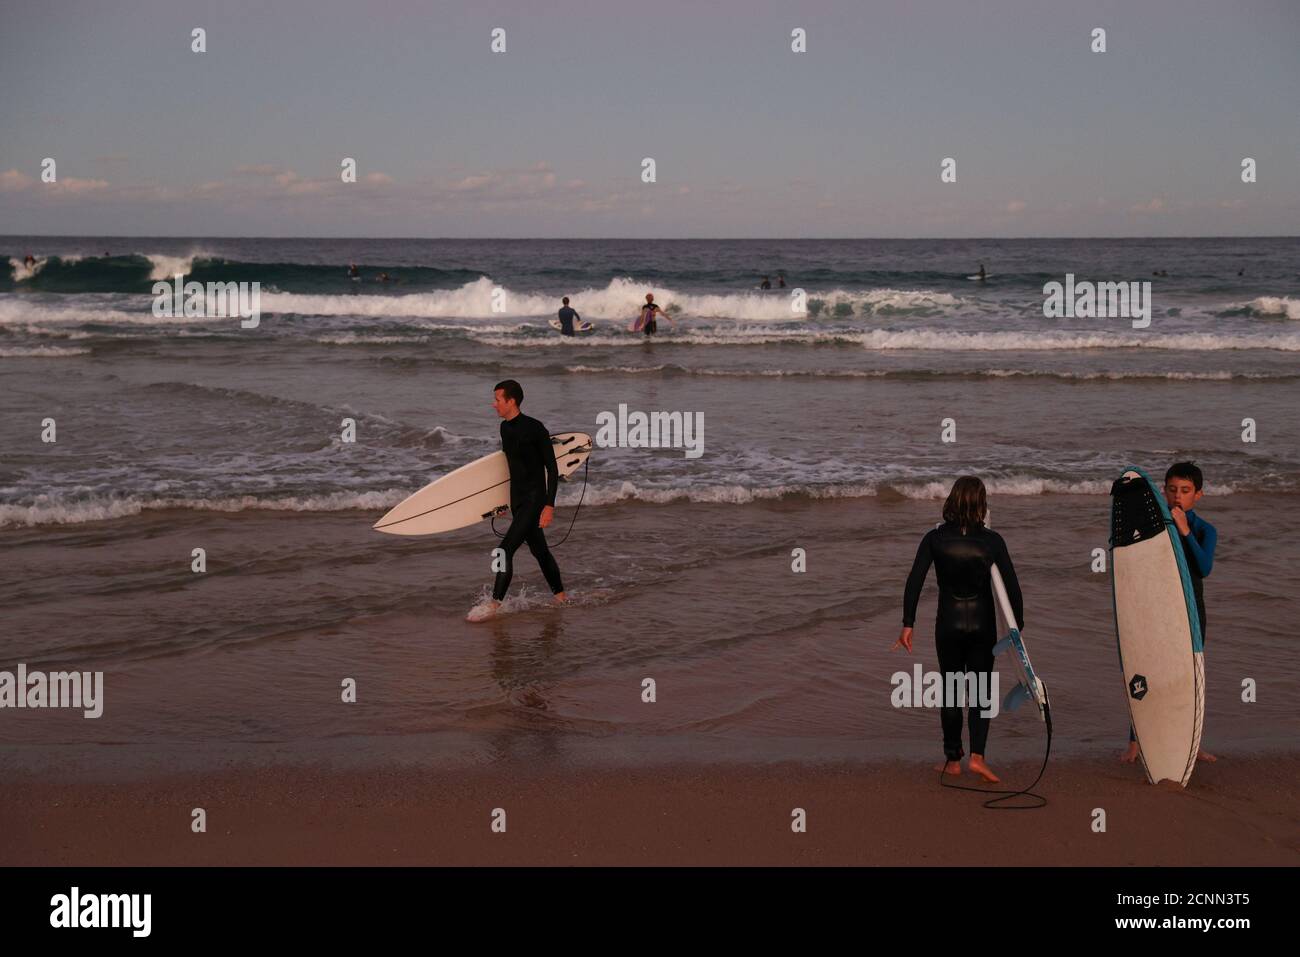 Surfers take to the water amidst the easing of restrictions implemented to curb the spread of the coronavirus disease (COVID-19) at Maroubra Beach in Sydney, Australia, May 11, 2020.  REUTERS/Loren Elliott Stock Photo